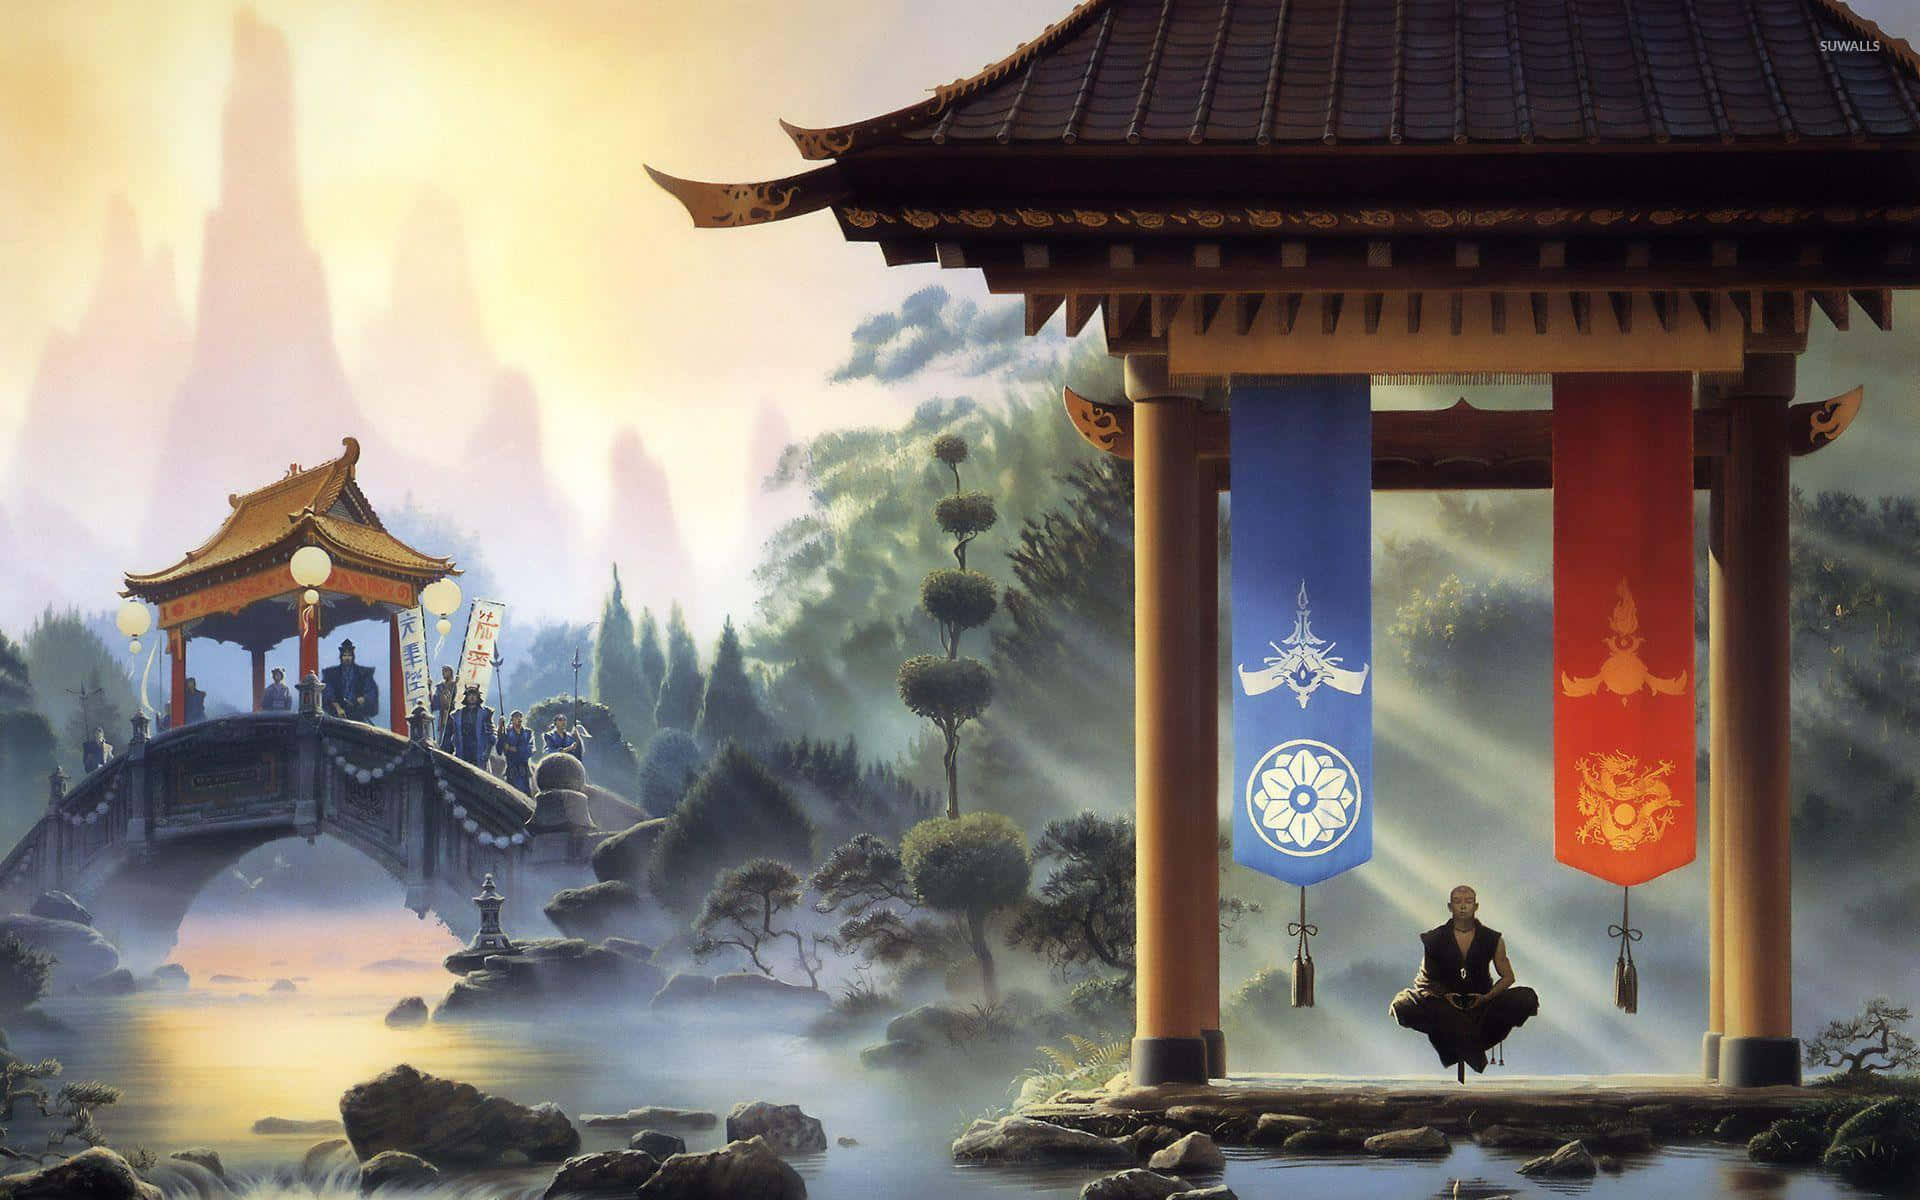 A Painting Of A Chinese Pavilion With A Statue In The Background